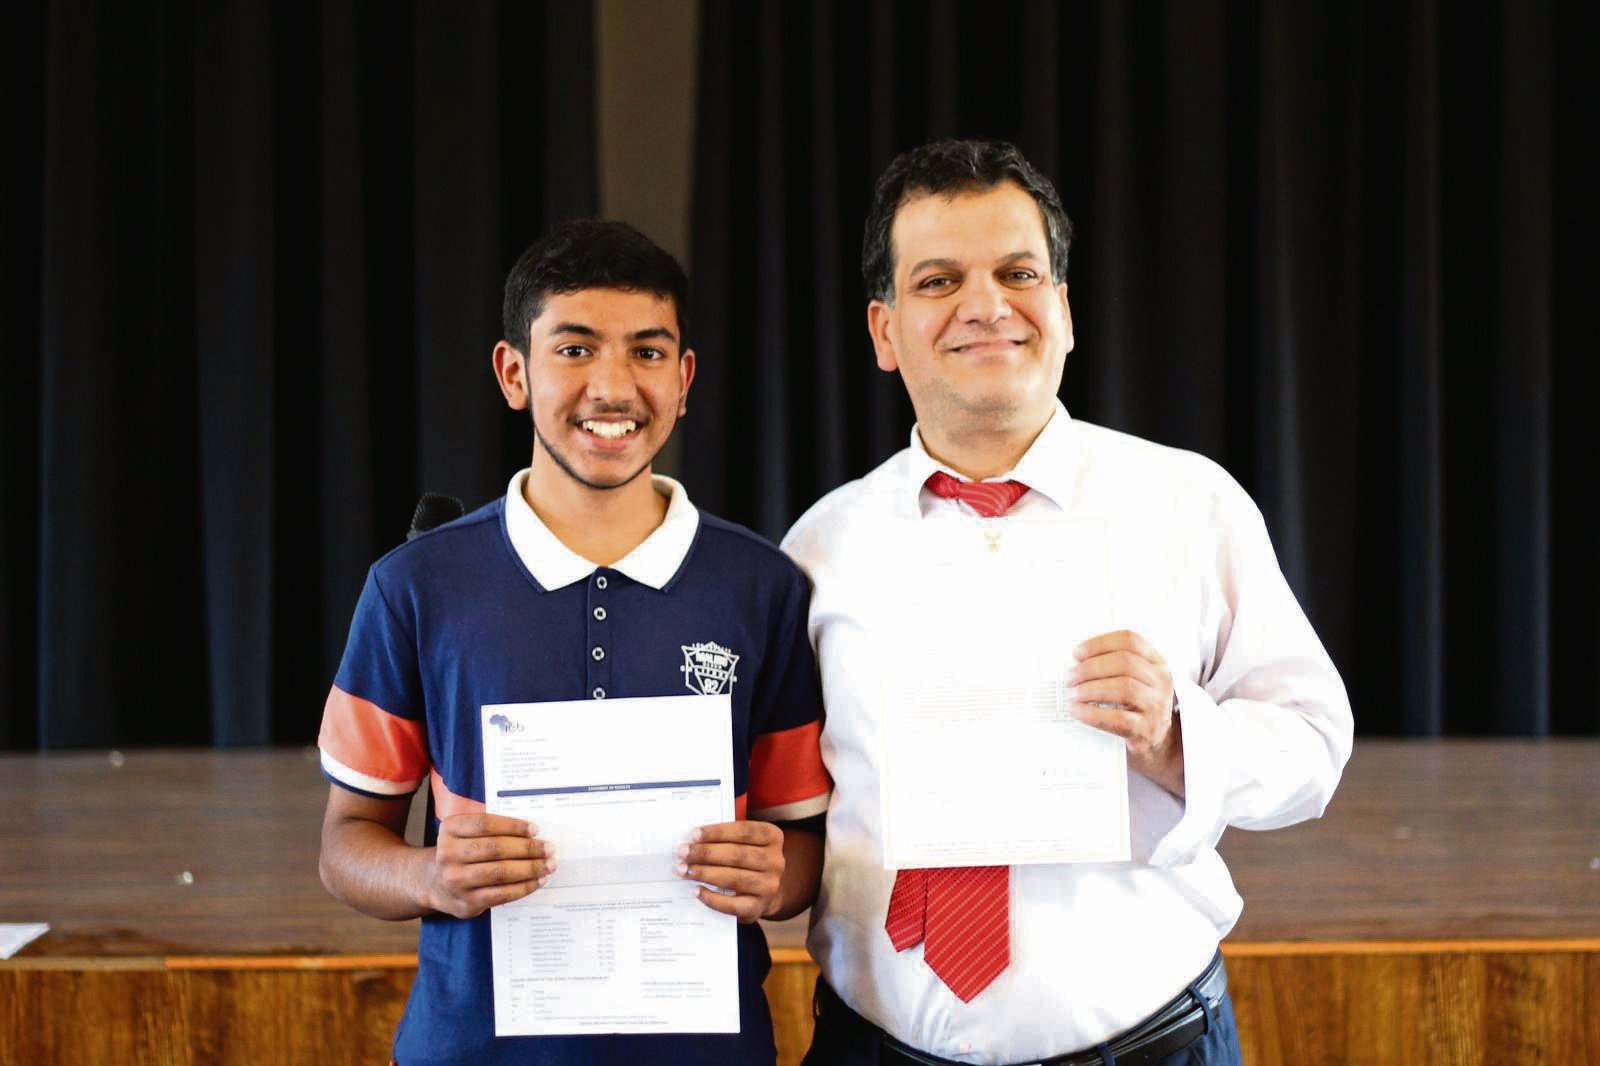 With an impressive 97% aggregate for his 10 distinctions, Faraaz Ahmed Parker is the star pupil at Star College Bridgetown. He is pictured here with the school principal PHOTO: supplied